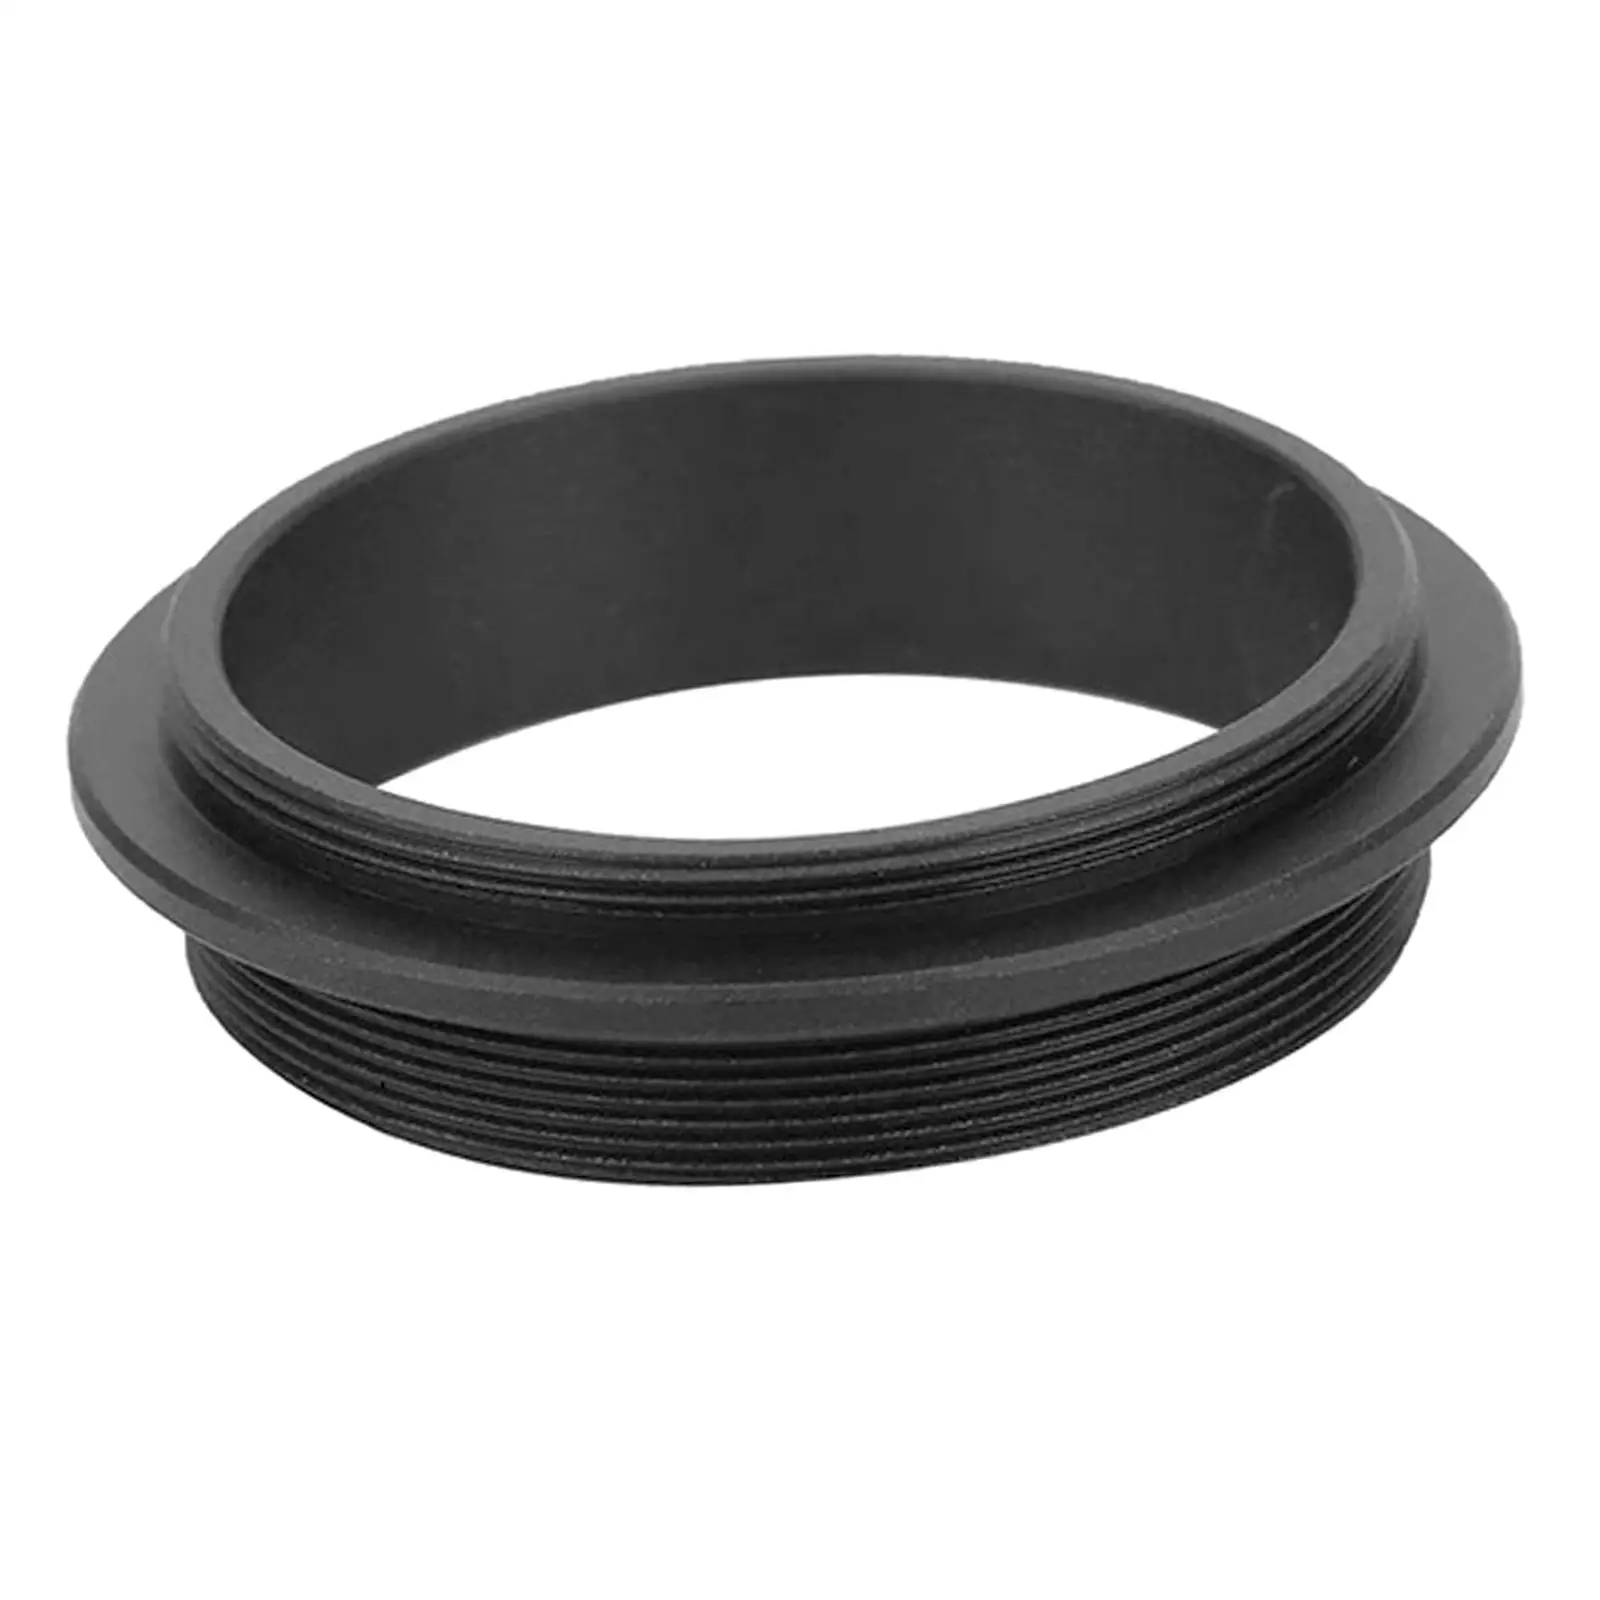 Macro Extension Tube Thread Adapter Ring Microscope Accessories Screw Mount Supplies Professional for Stereo Microscope DSLR